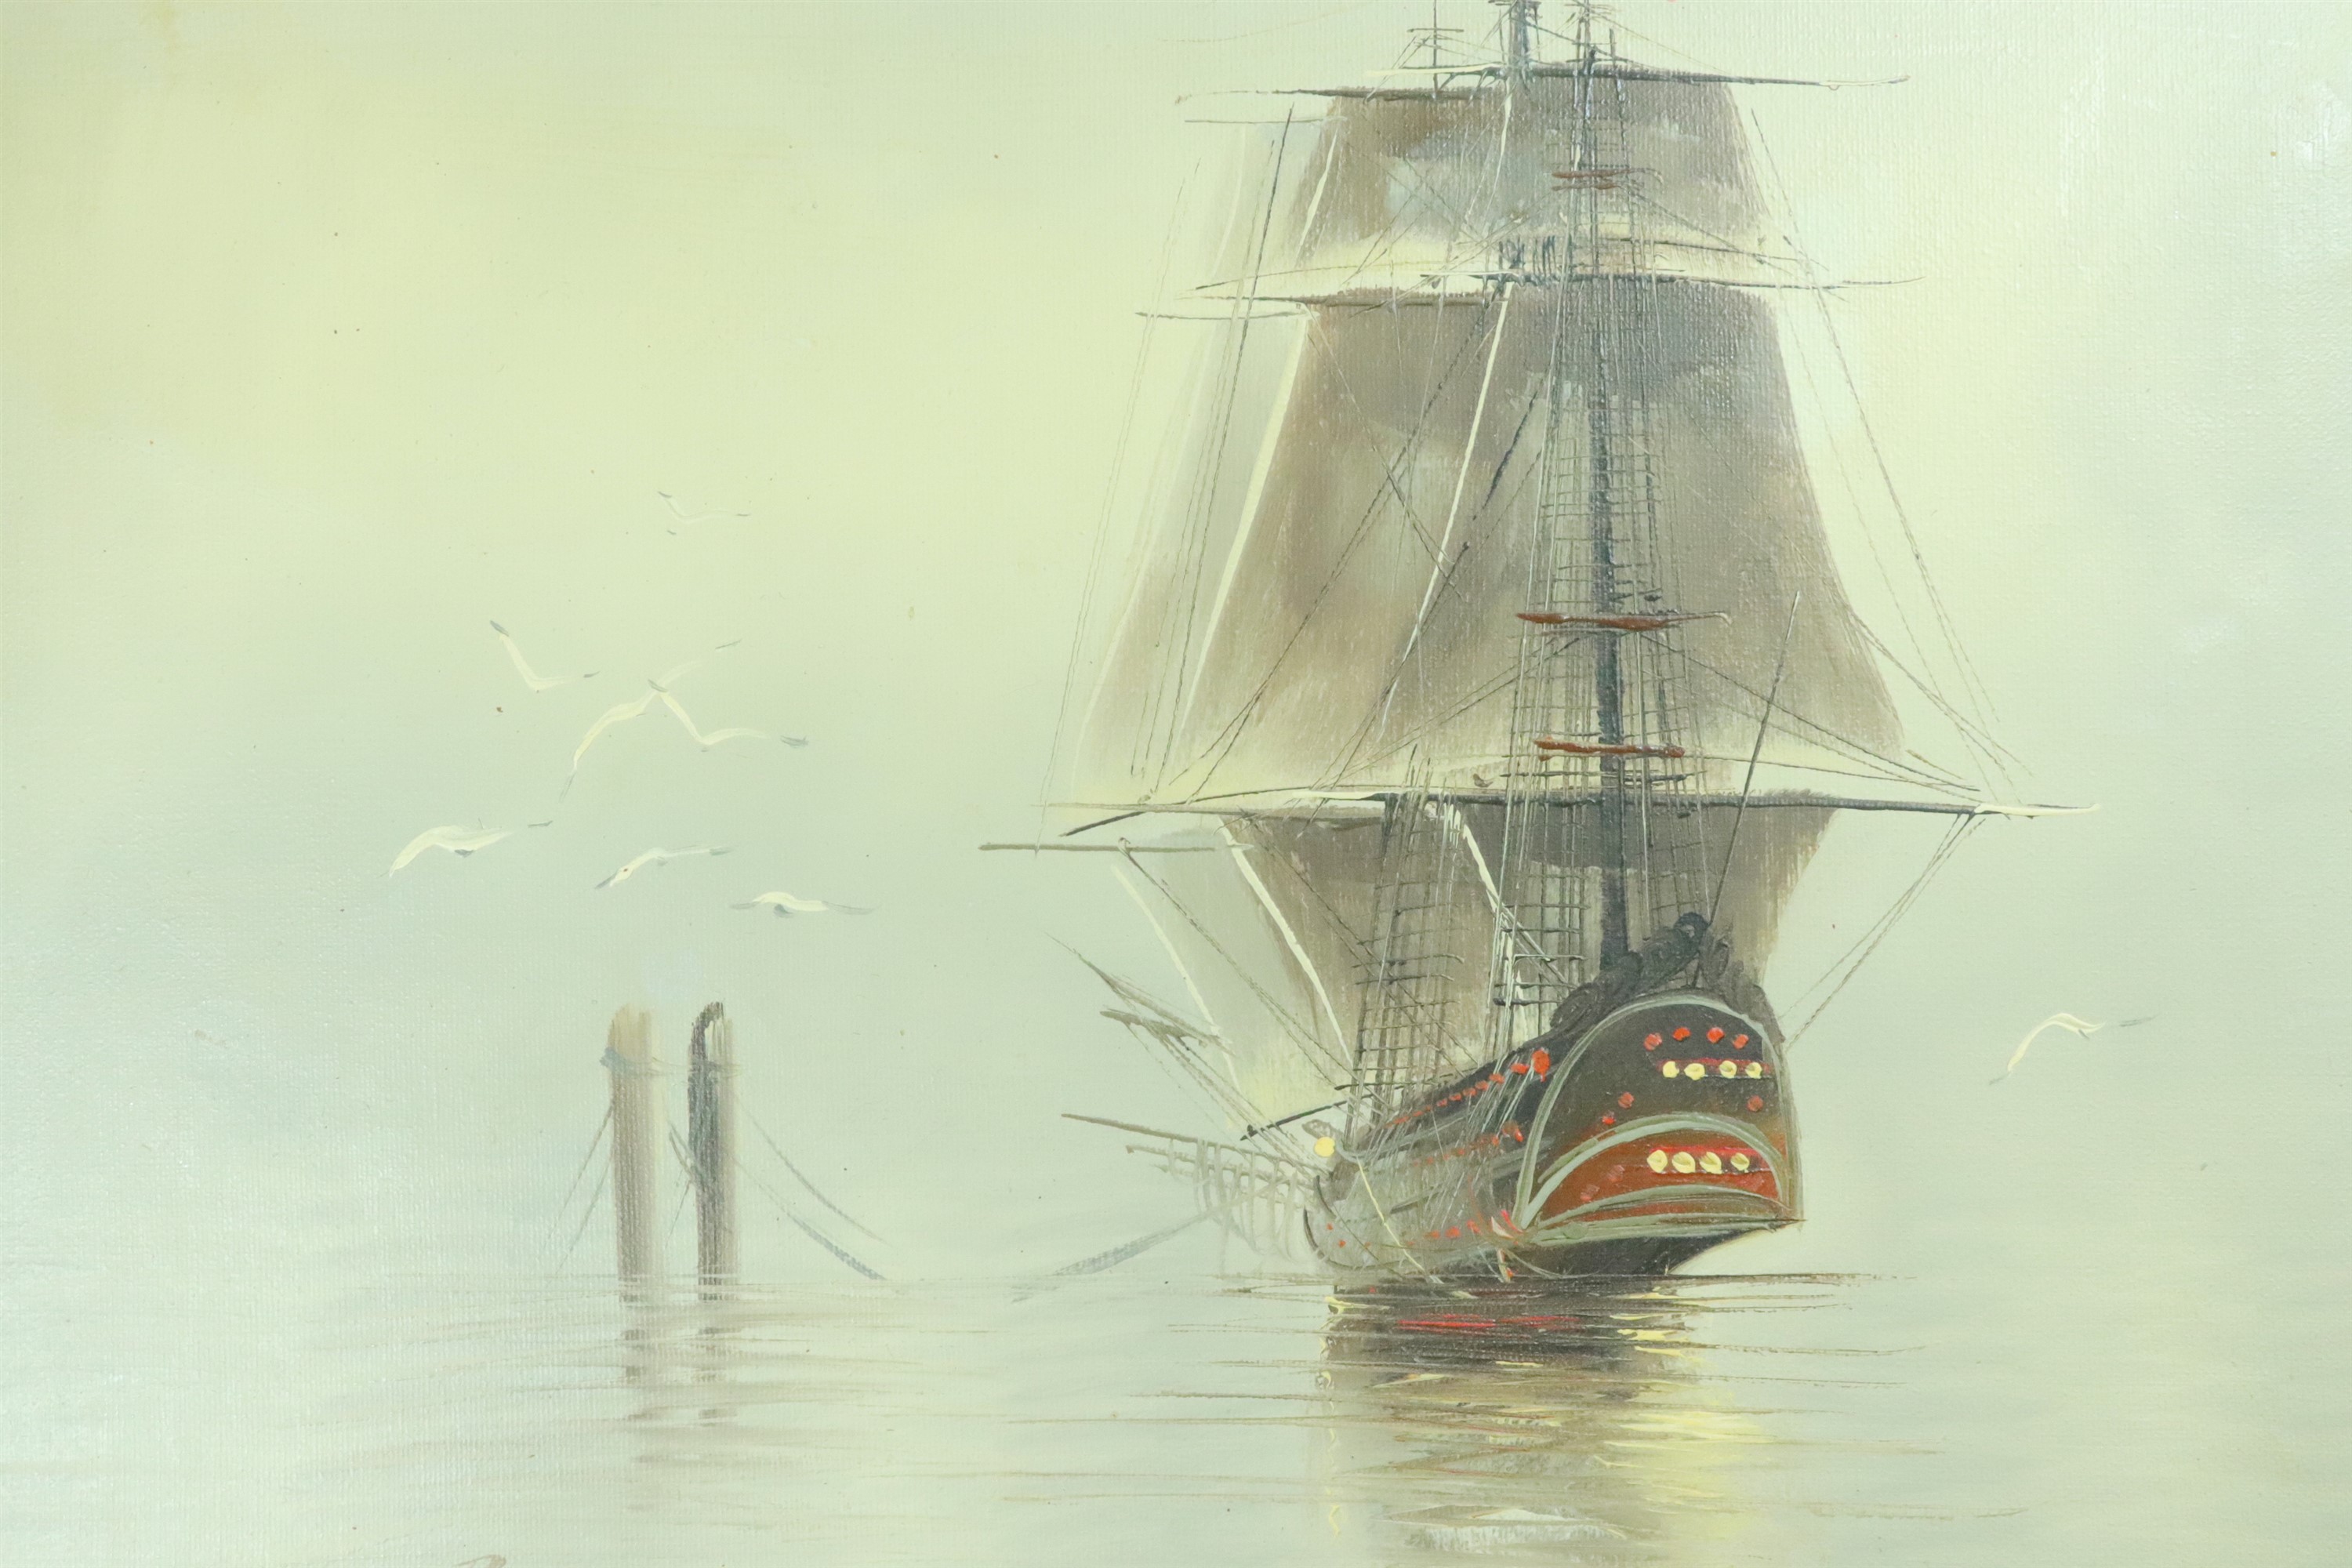 Bannon (20th Century) A misty seascape depicting a docked sailing ship with surrounding seagulls,